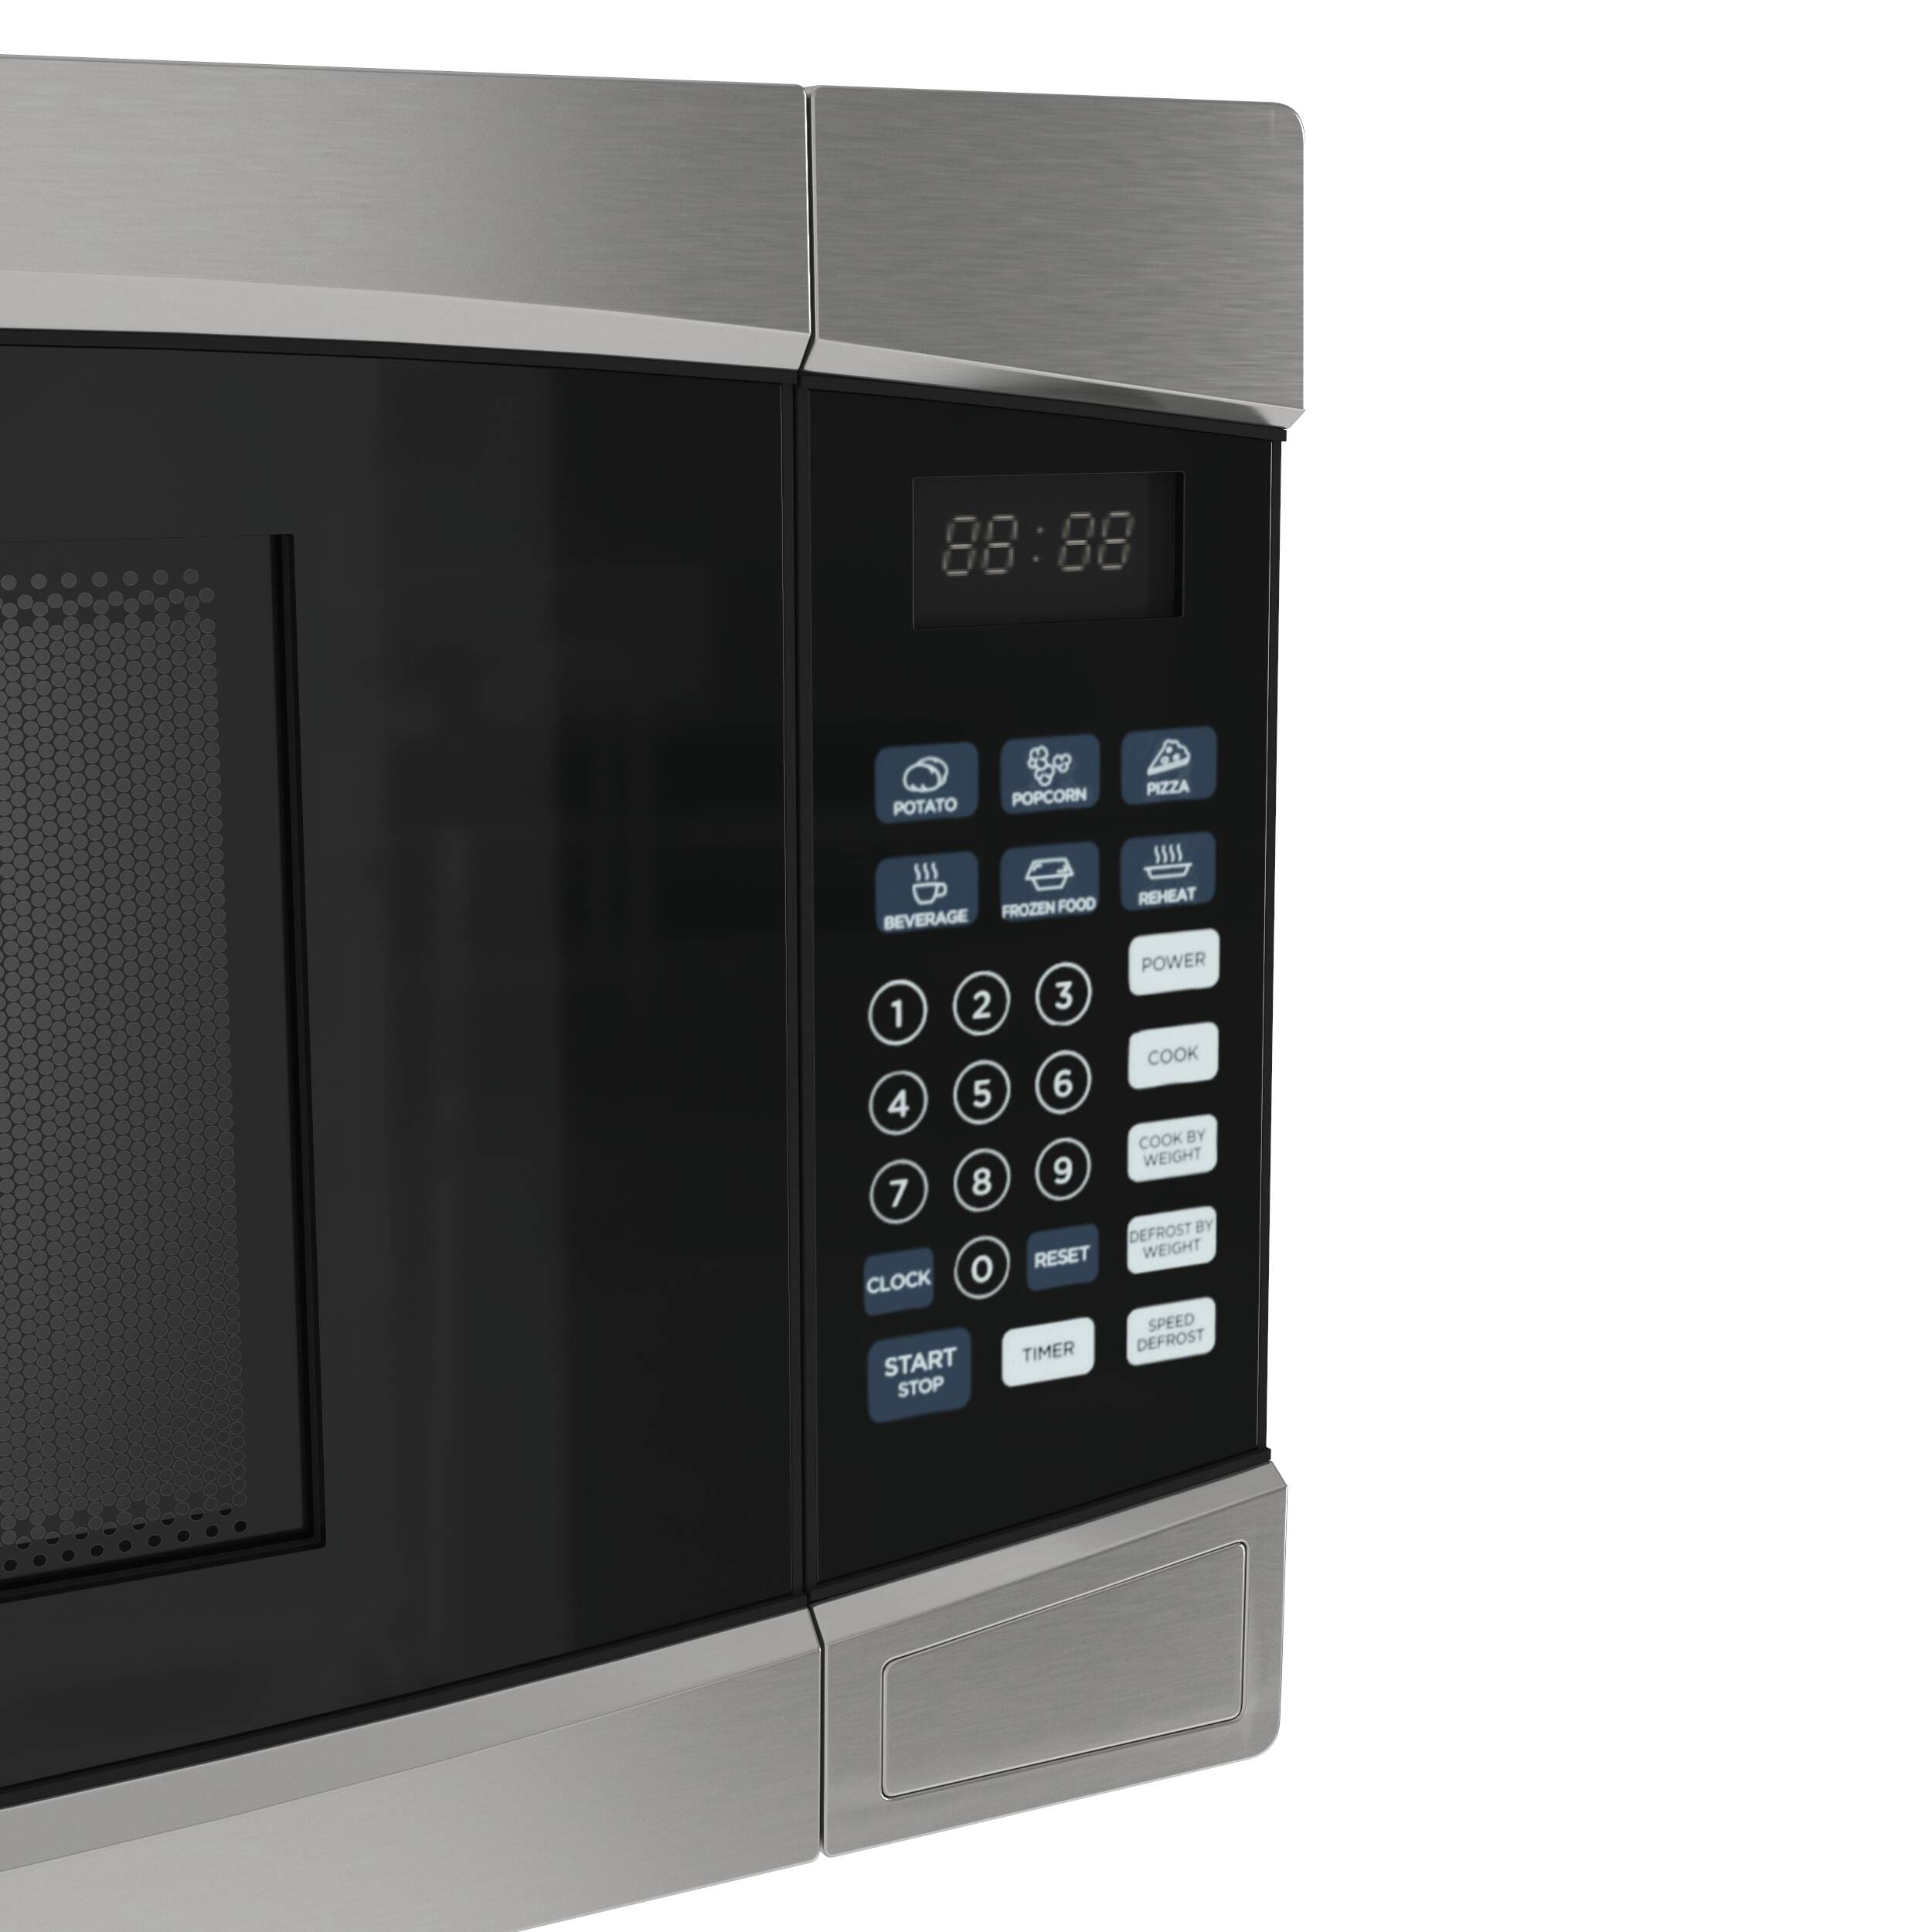 Commercial CHEF 1.1 cu. ft. Countertop Microwave Stainless and